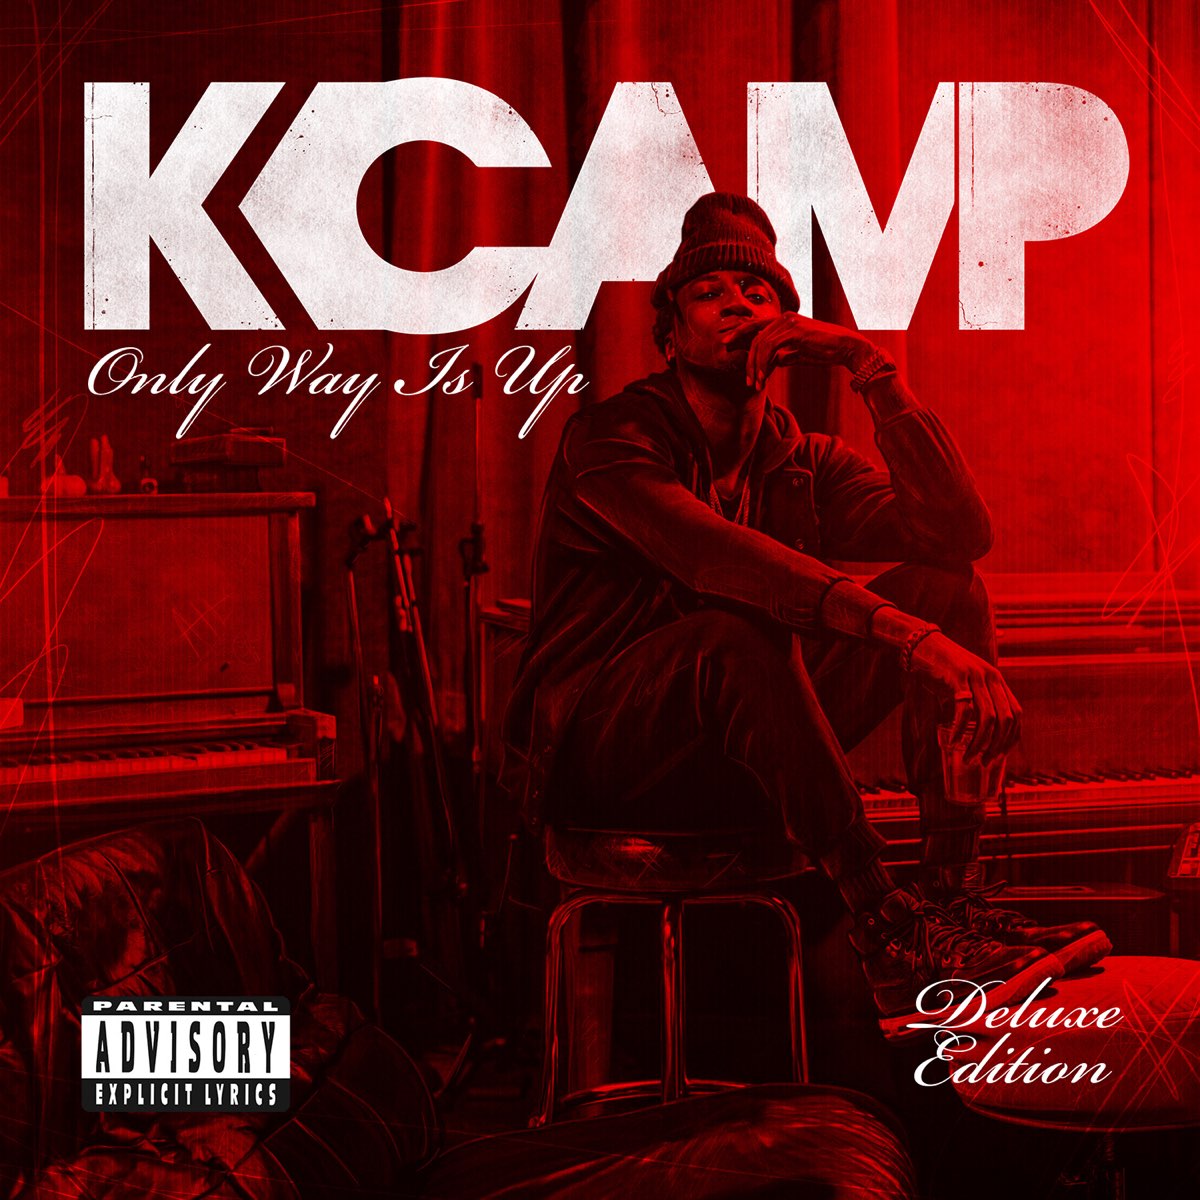 K k camping. K Camp. Mixed up (Deluxe Edition). Breezy Deluxe Cover. K Camp & French Montana & Genius - money i made.